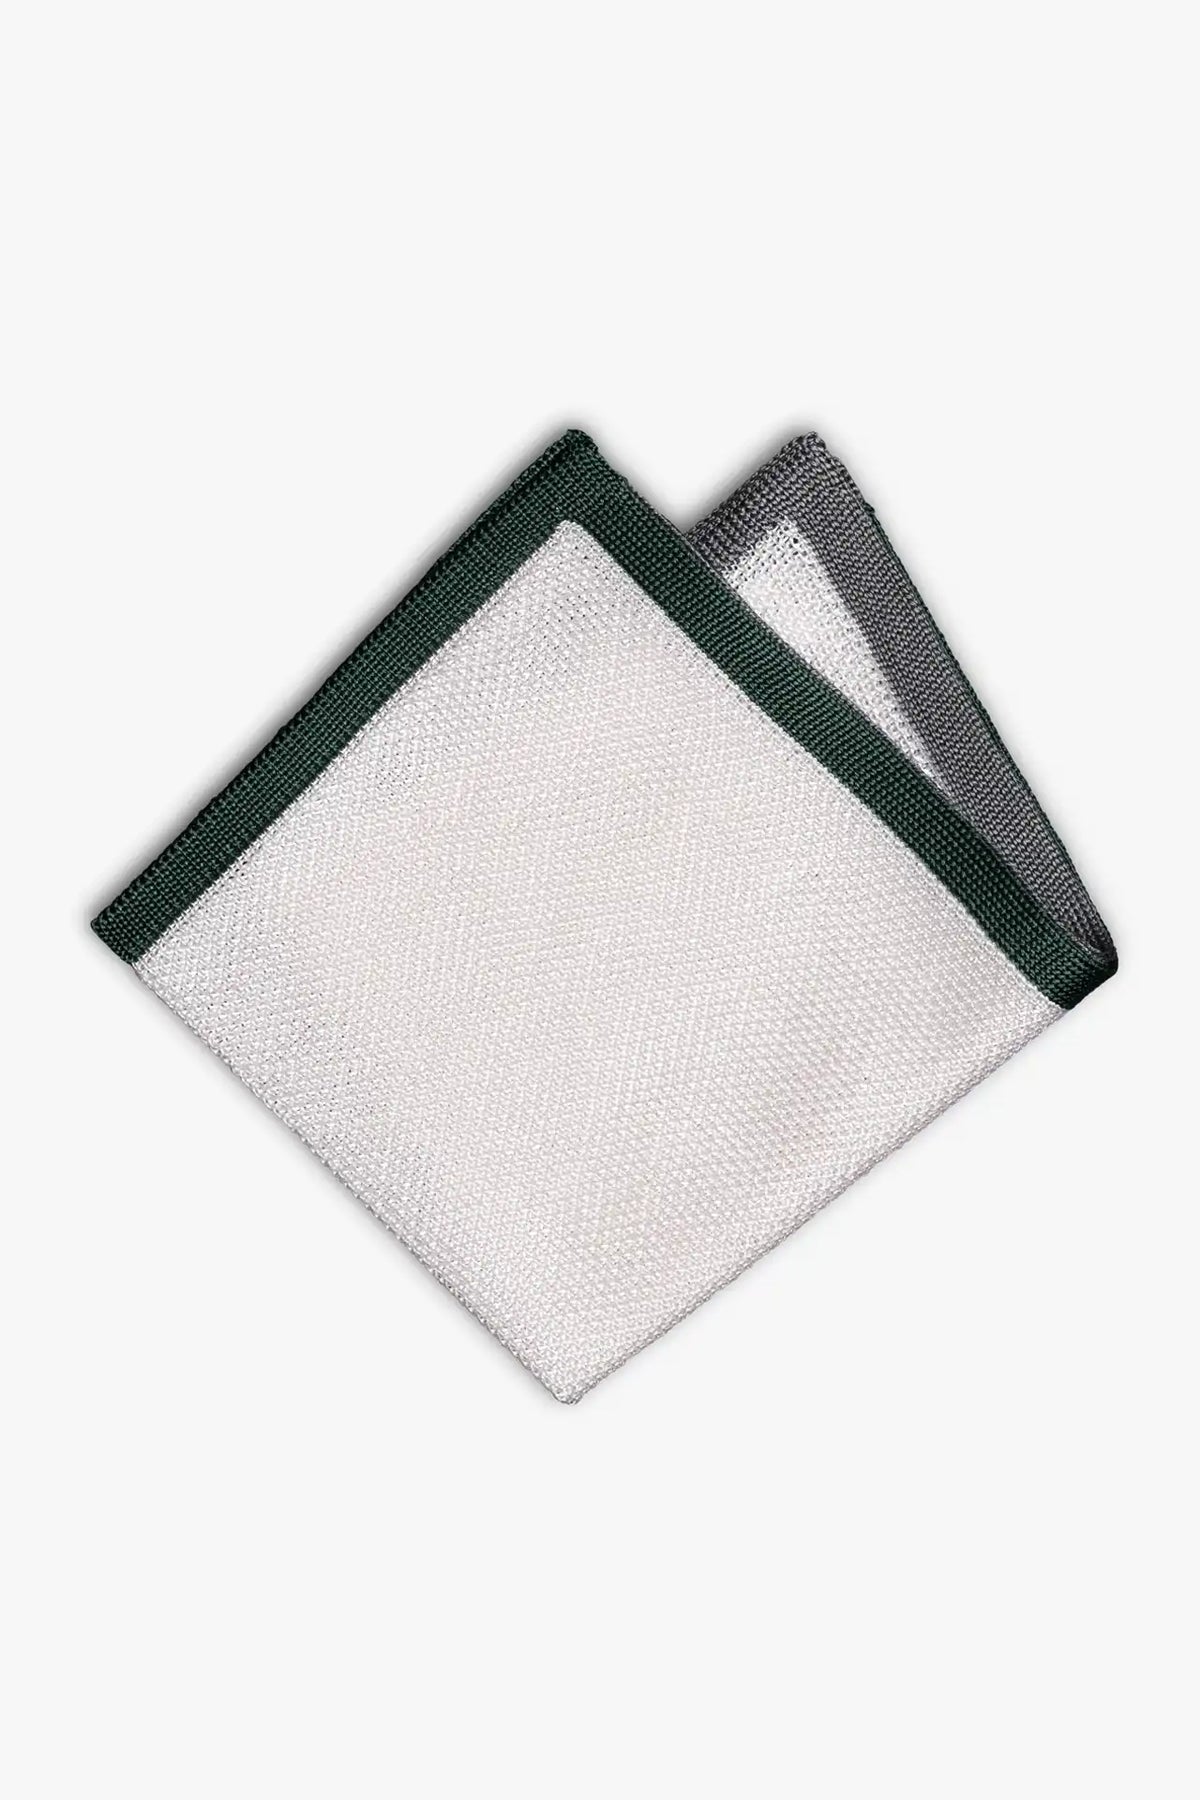 White pocket square with gray and green boarder. Knitted silk made in Italy.